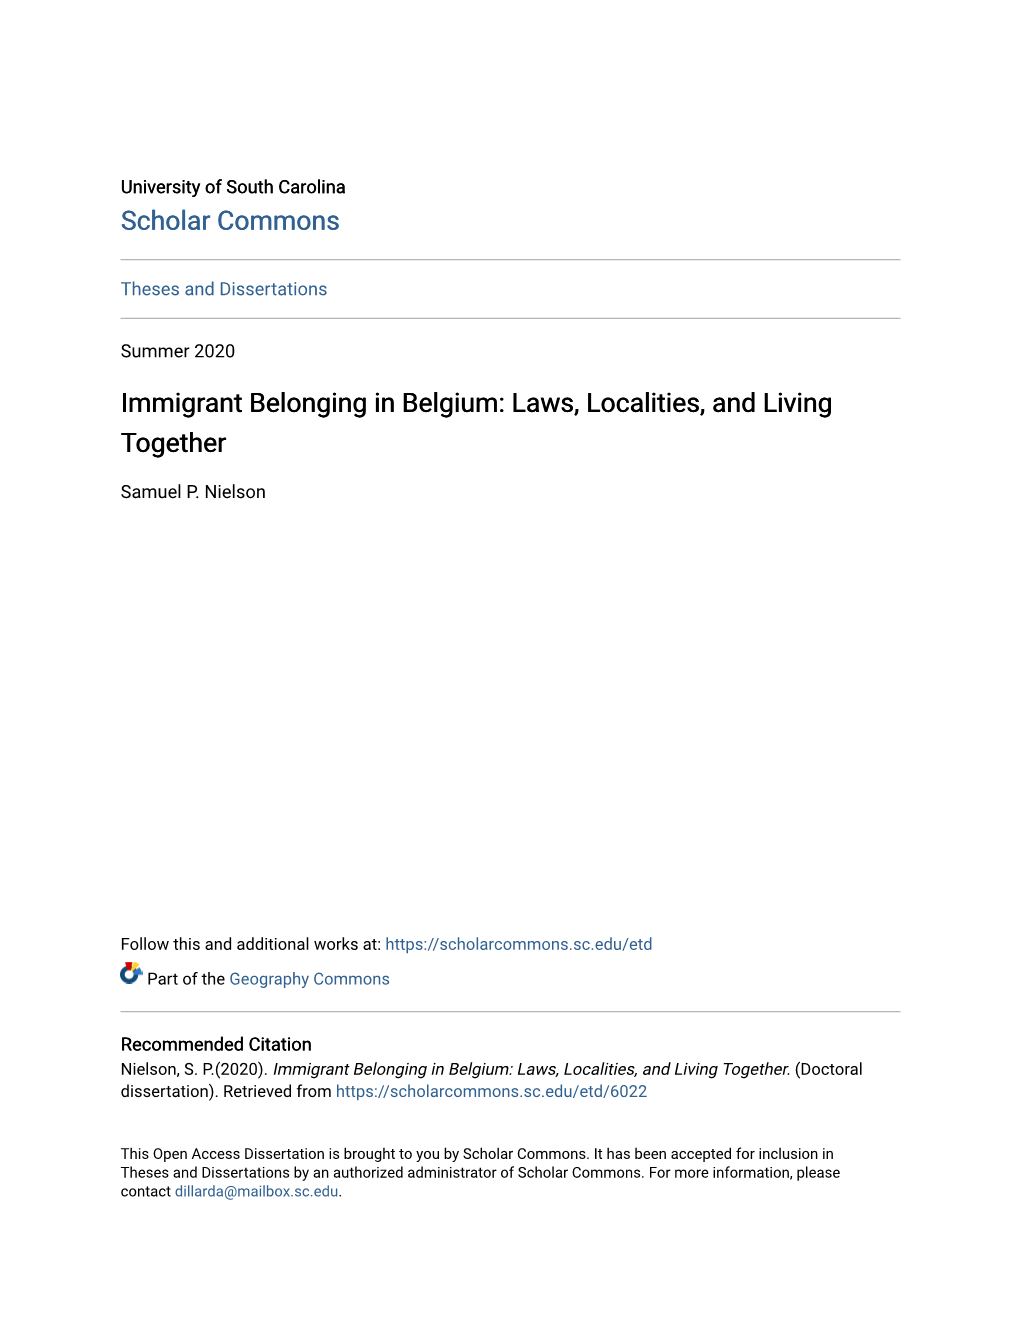 Immigrant Belonging in Belgium: Laws, Localities, and Living Together